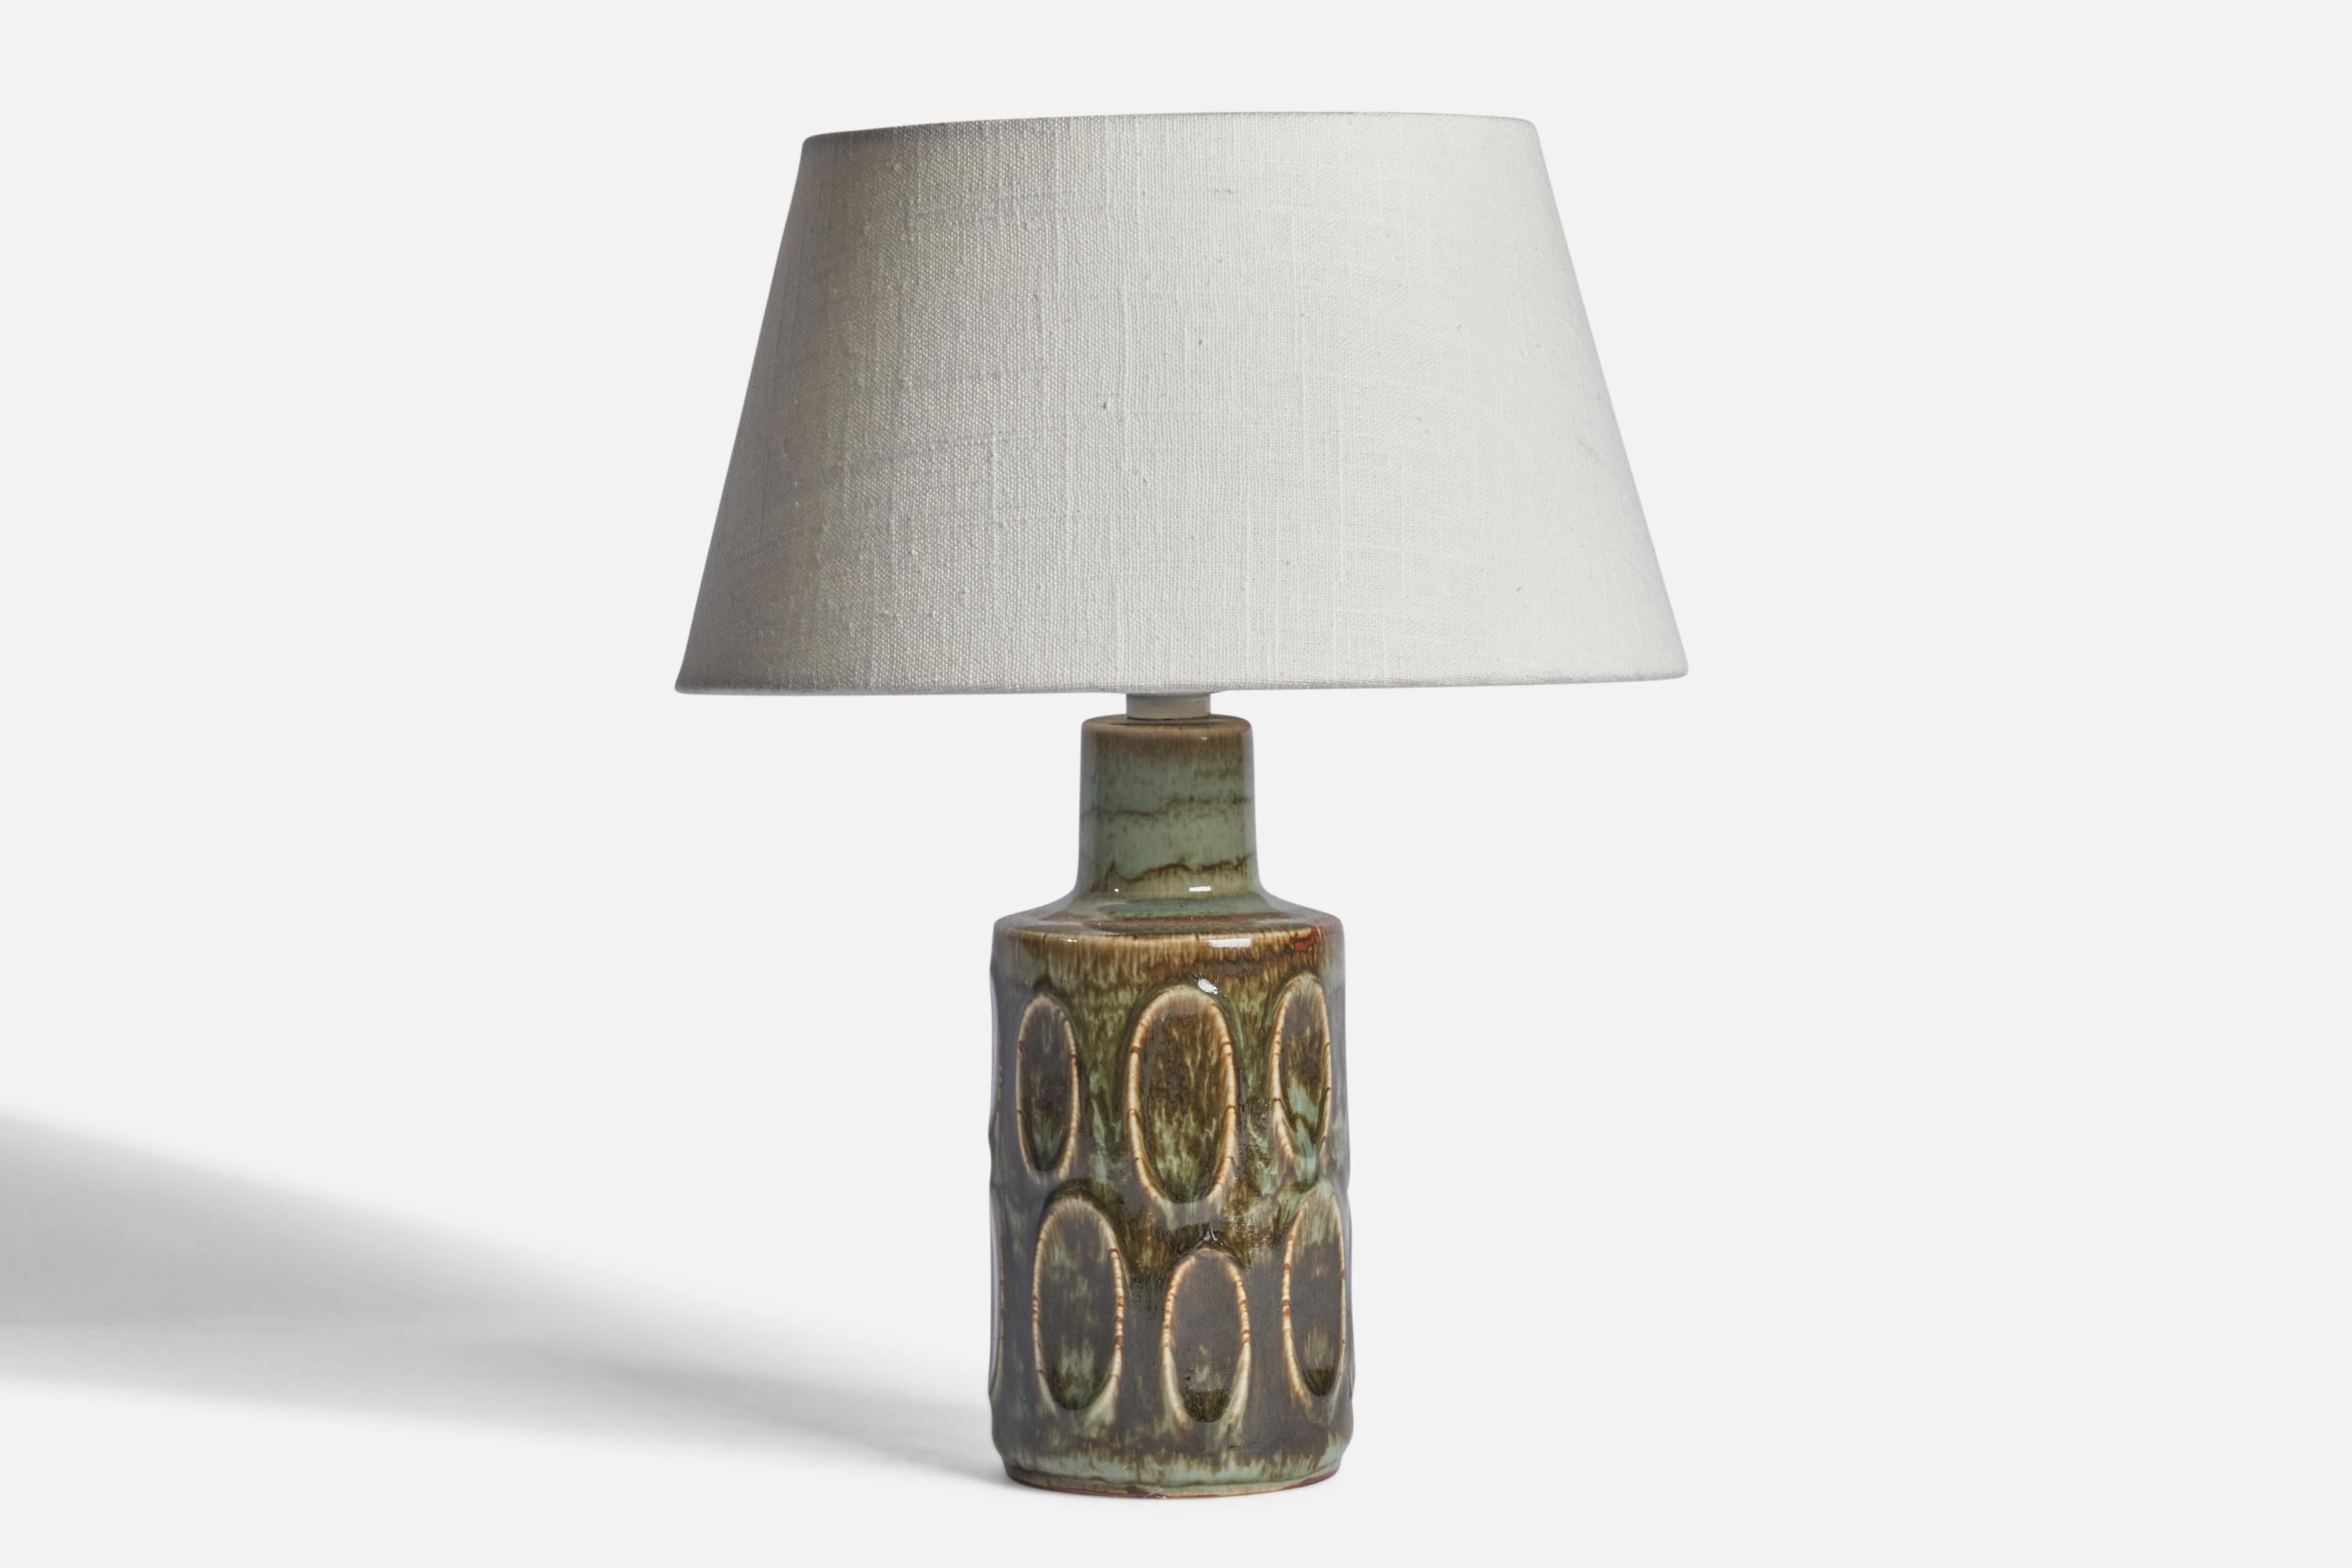 A green-glazed stoneware table lamp designed and produced by Søholm, Bornholm, Denmark, 1960s.

Dimensions of Lamp (inches): 10.15